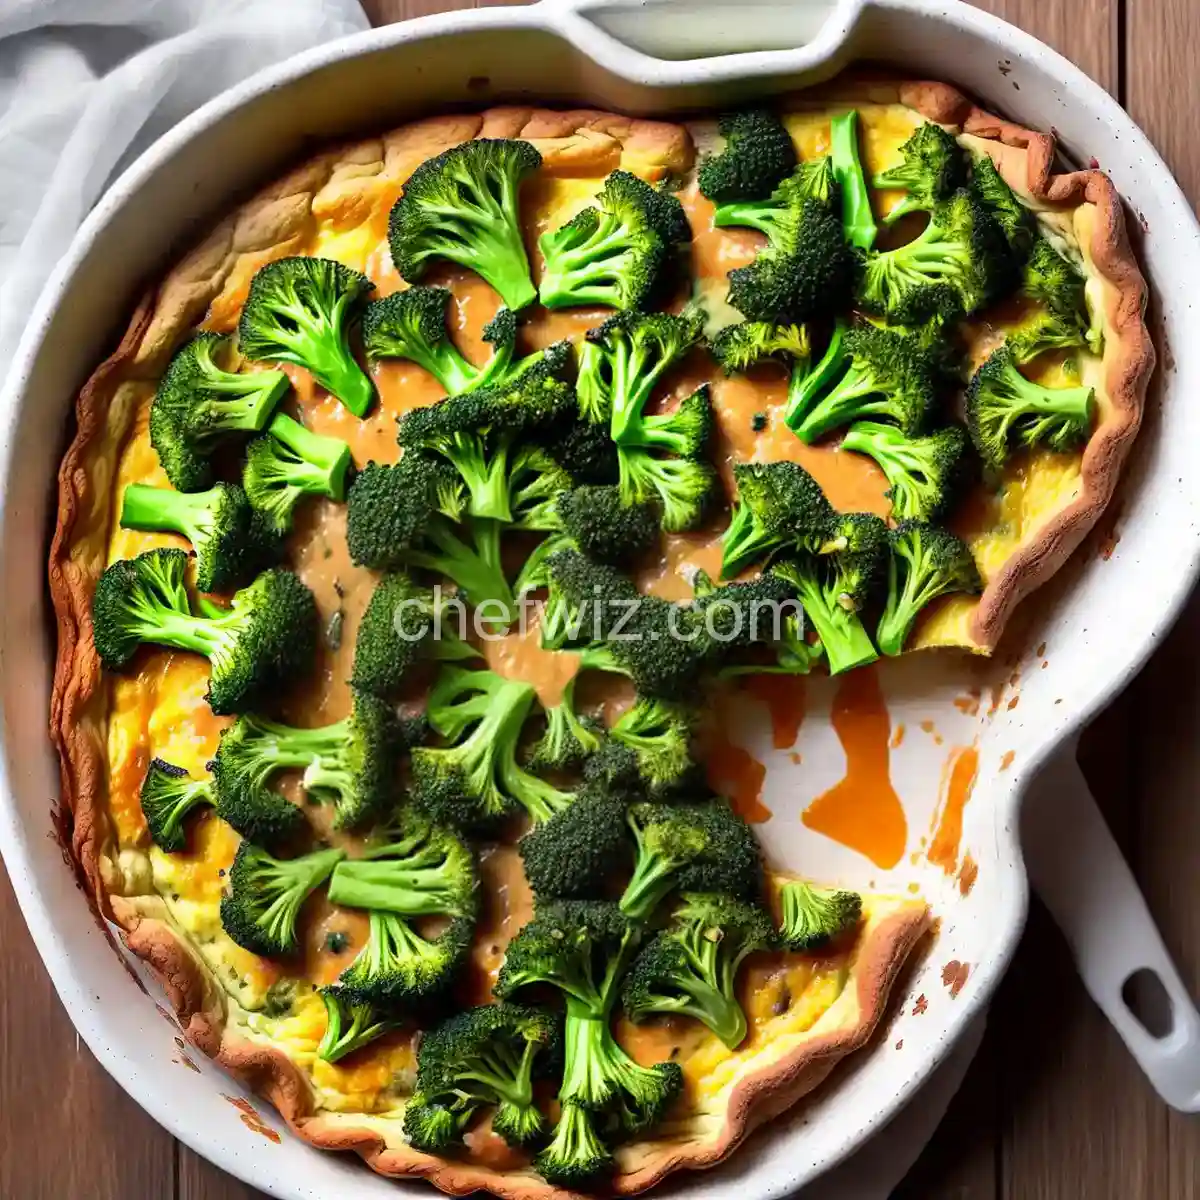 Easy Broccoli Quiche - Recipes. Food. Cooking. Eating. Dinner ideas ...